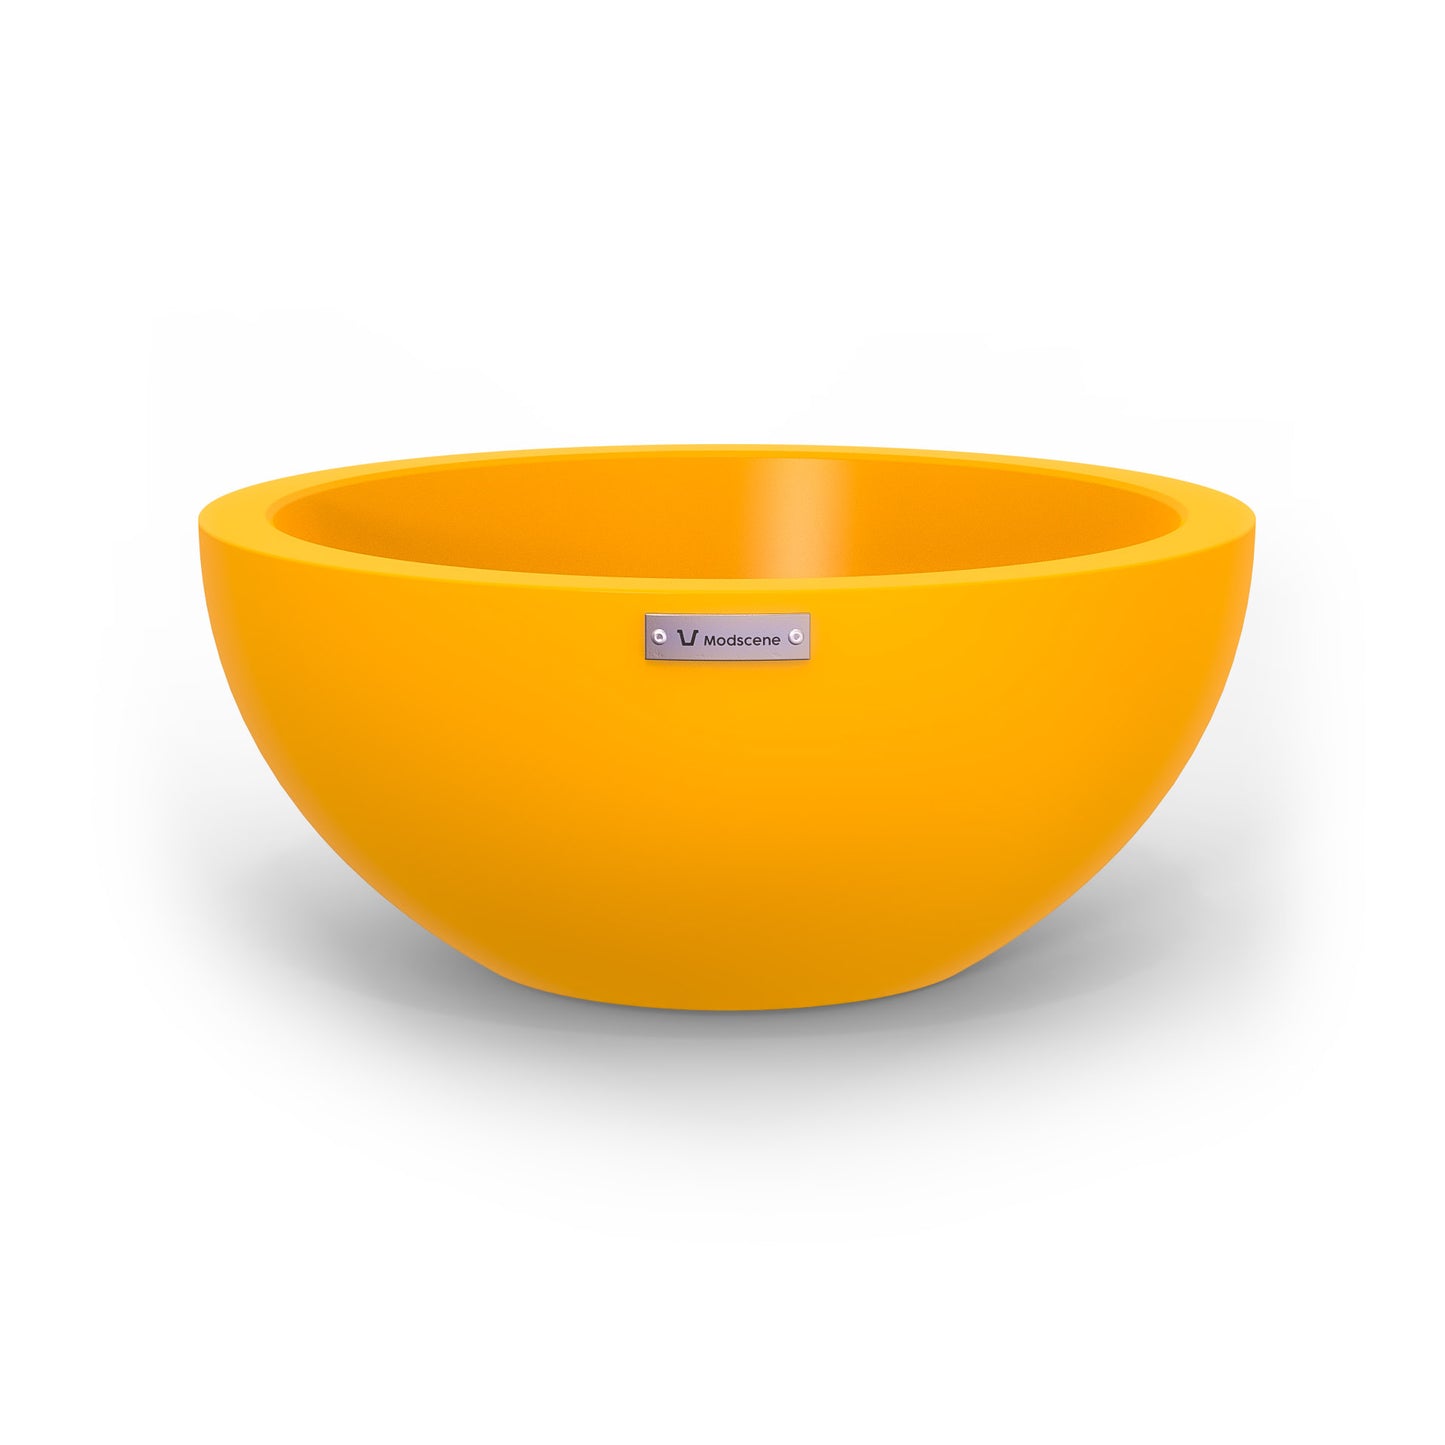 A small planter bowl in yellow made by Modscene. Australian planters.